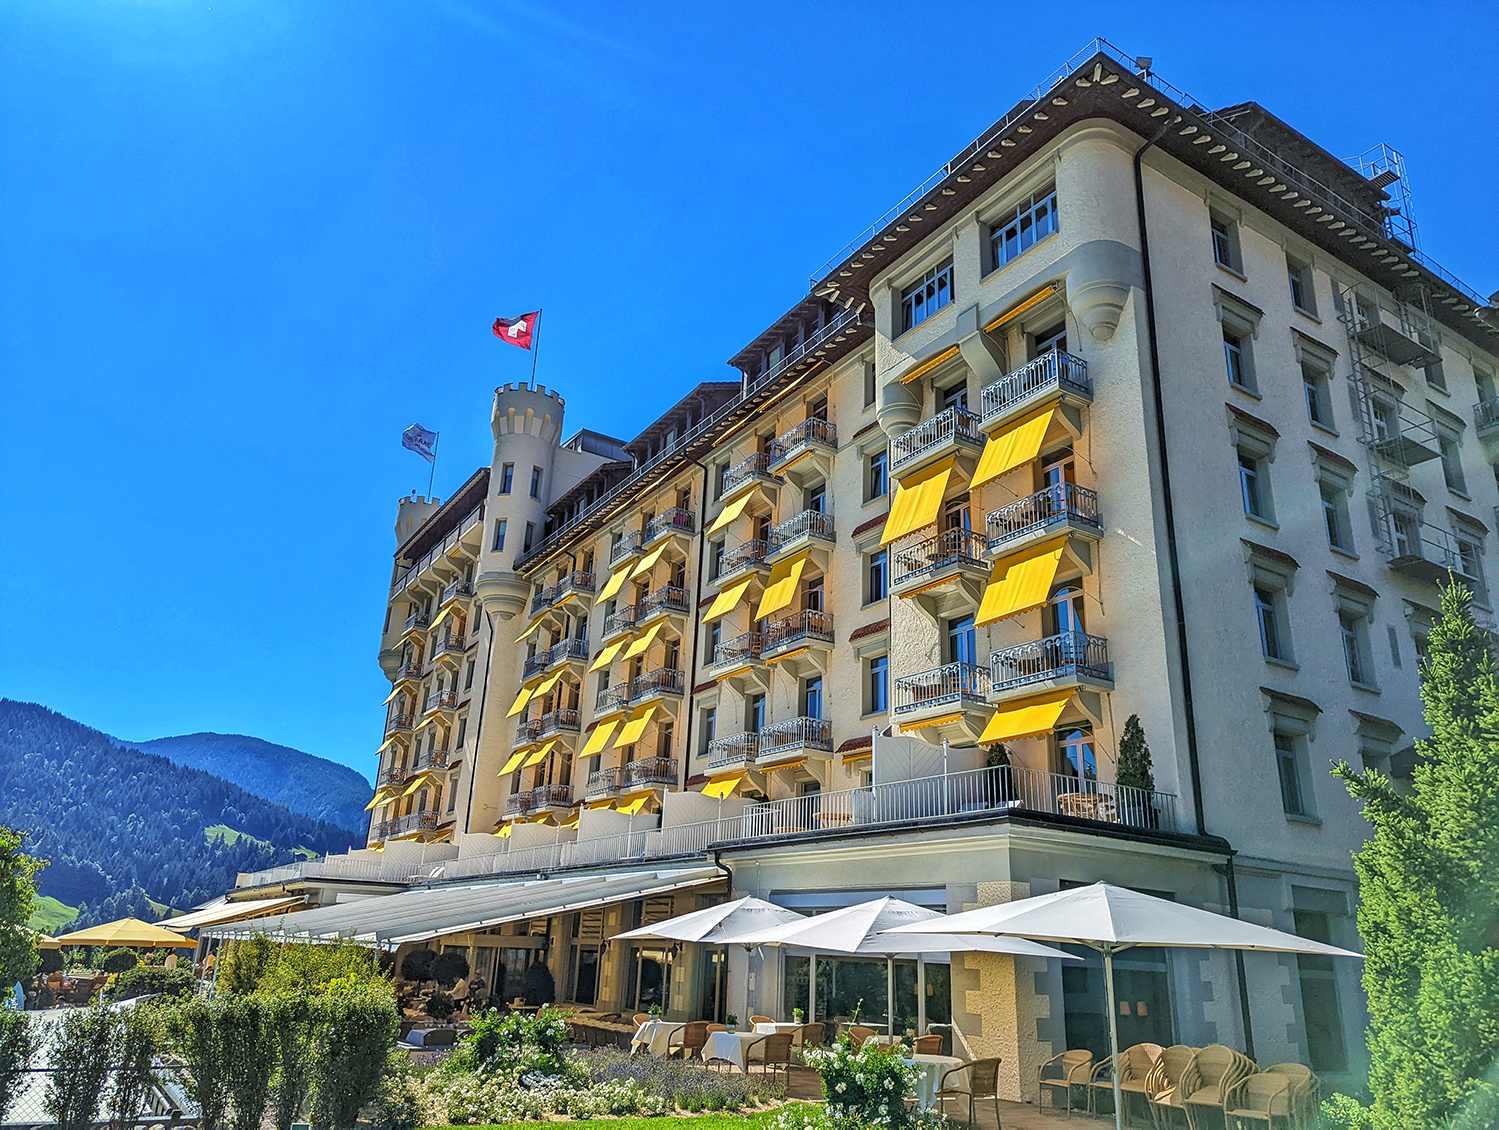 Gstaad Palace in Switzerland on a bright blue summer day